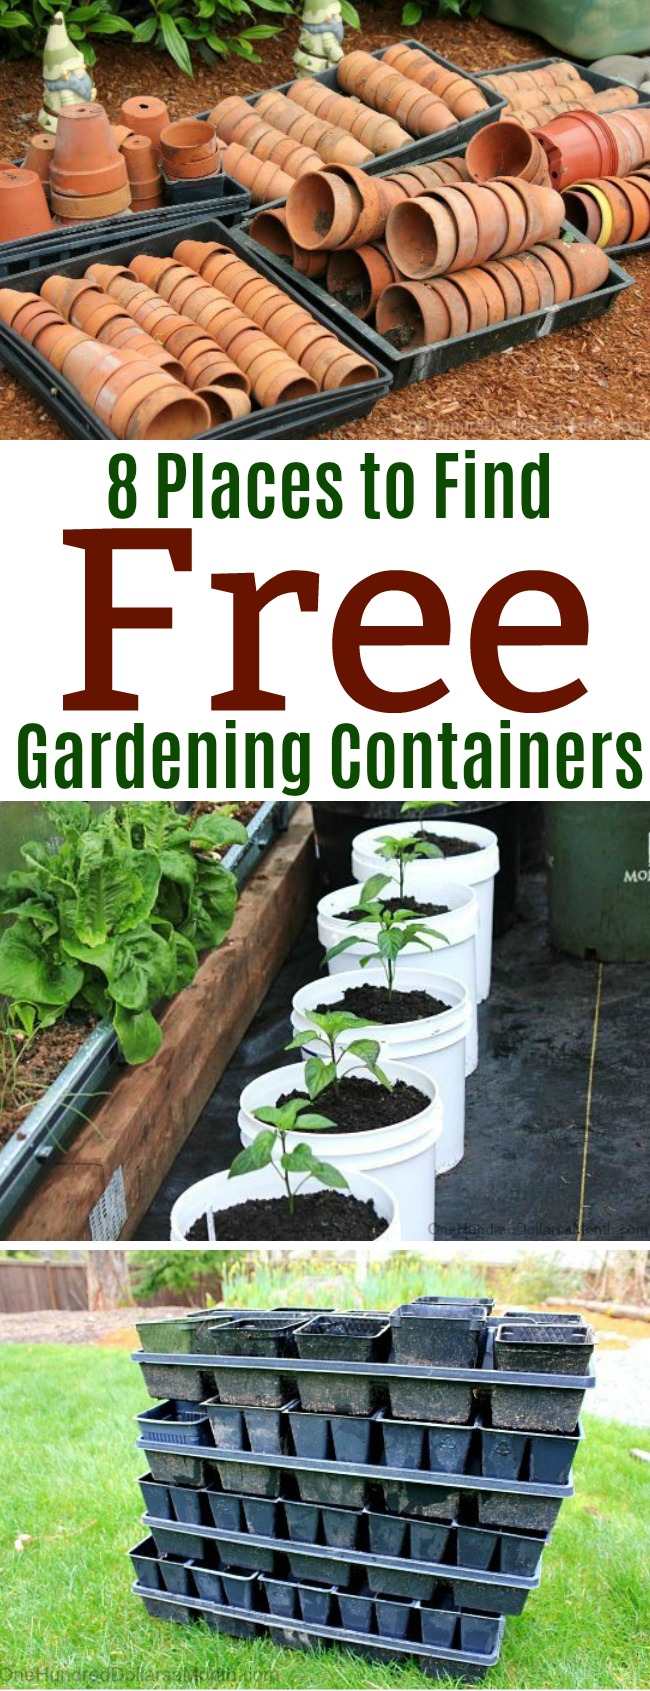 8 Places to Find Free Gardening Containers